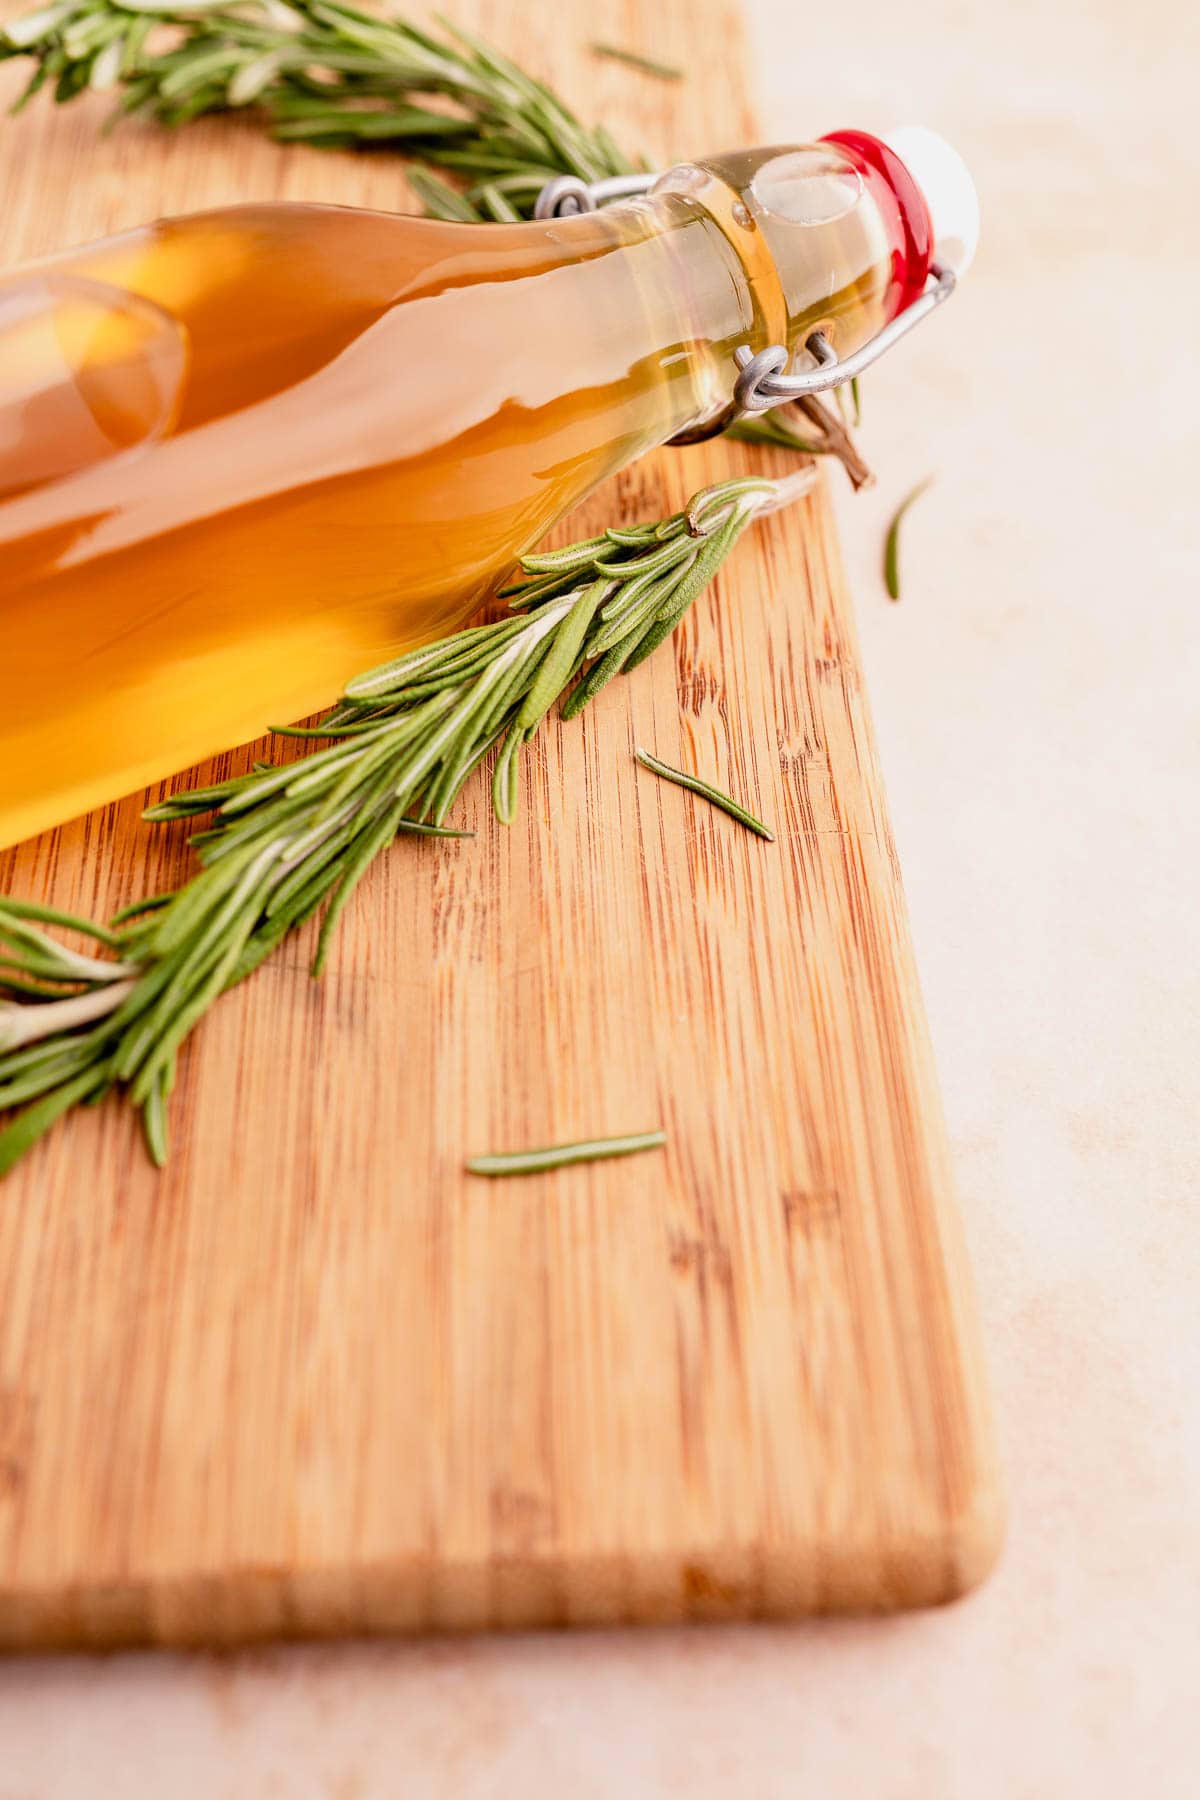 A bottle of rosemary-infused olive oil on a wooden cutting board.